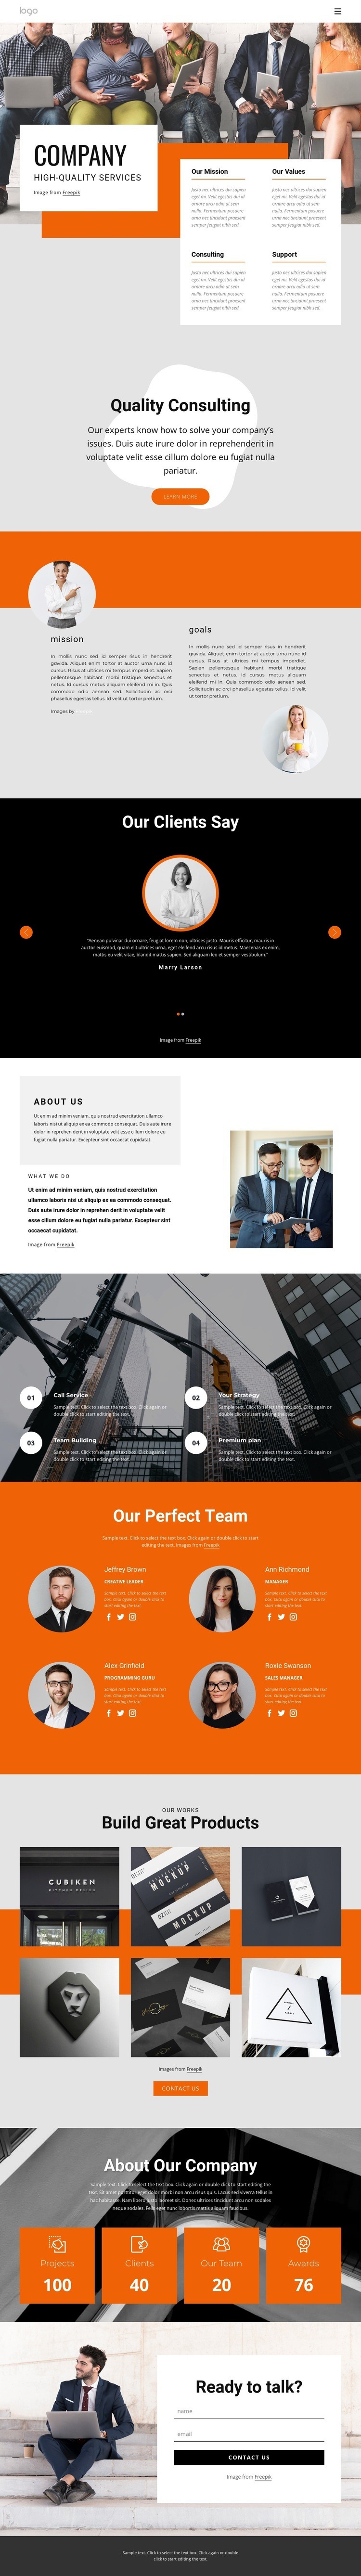 Hight quality consulting firm Squarespace Template Alternative